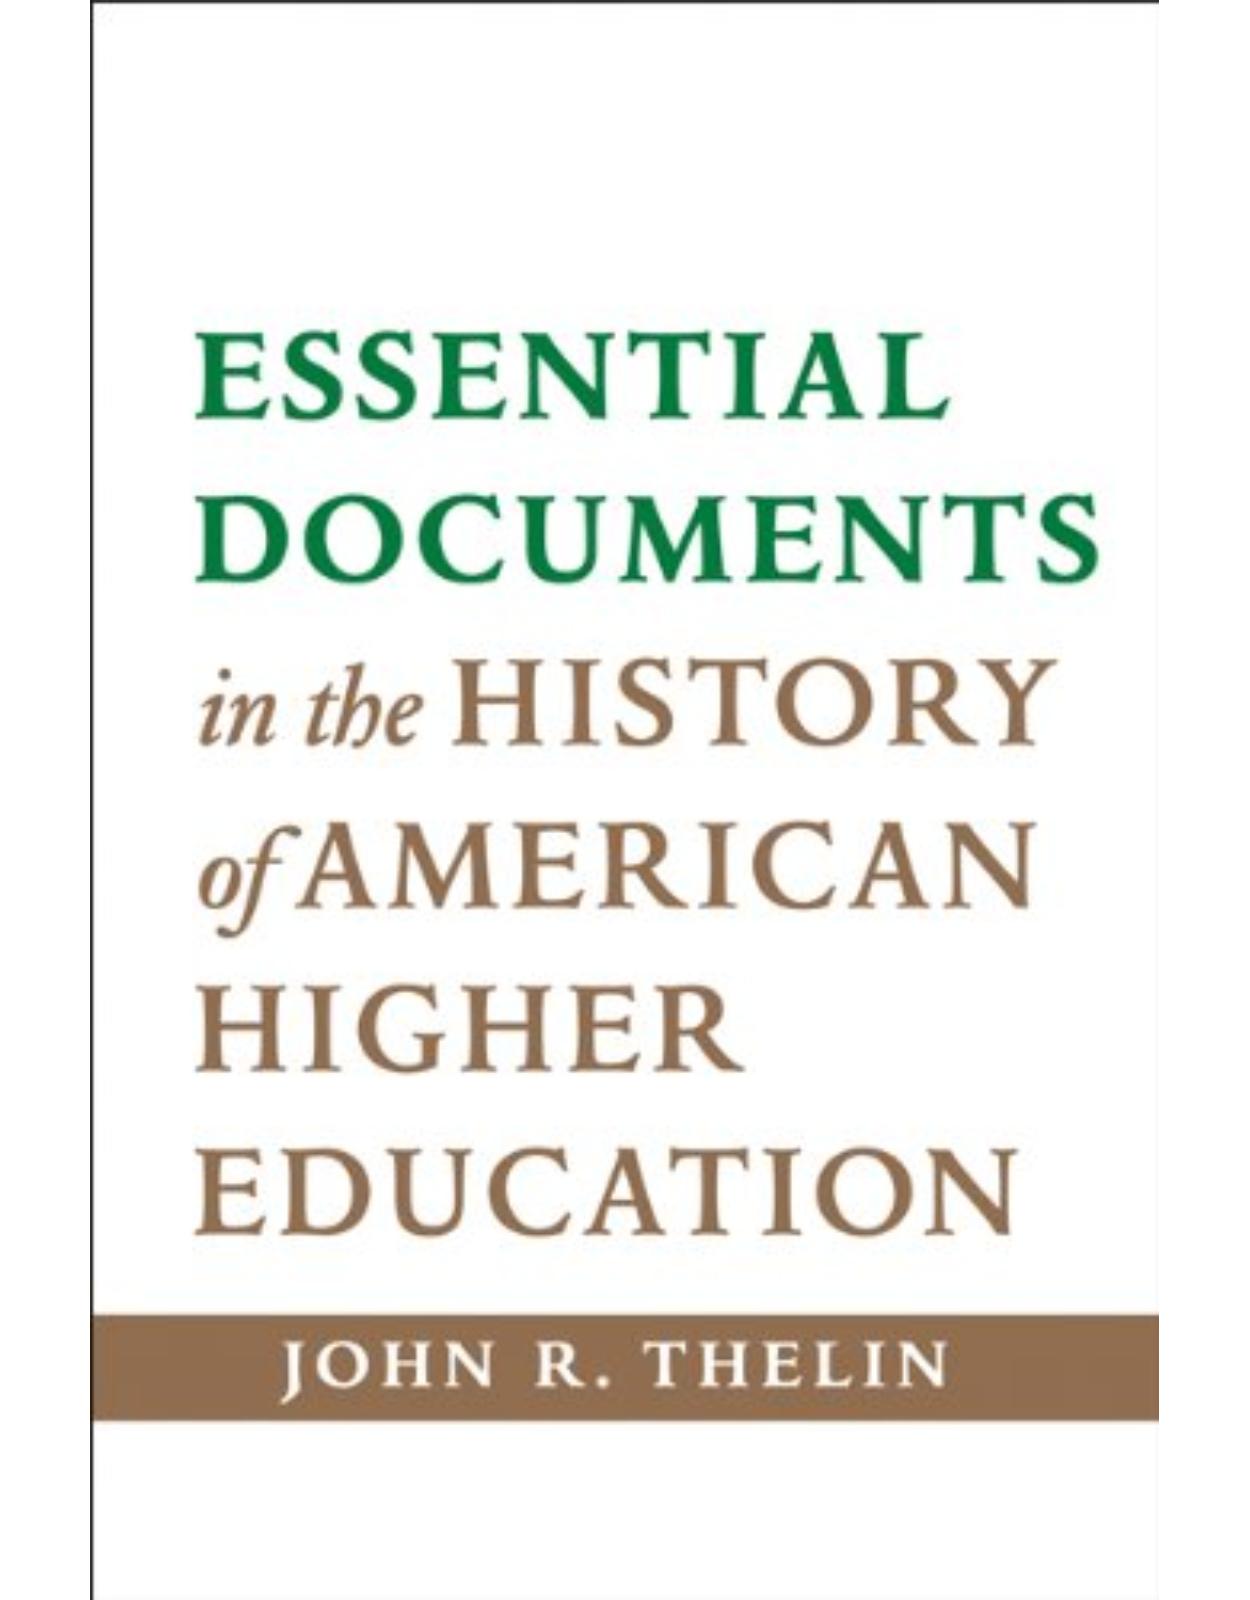 Essential Documents in the History of American Higher Education,